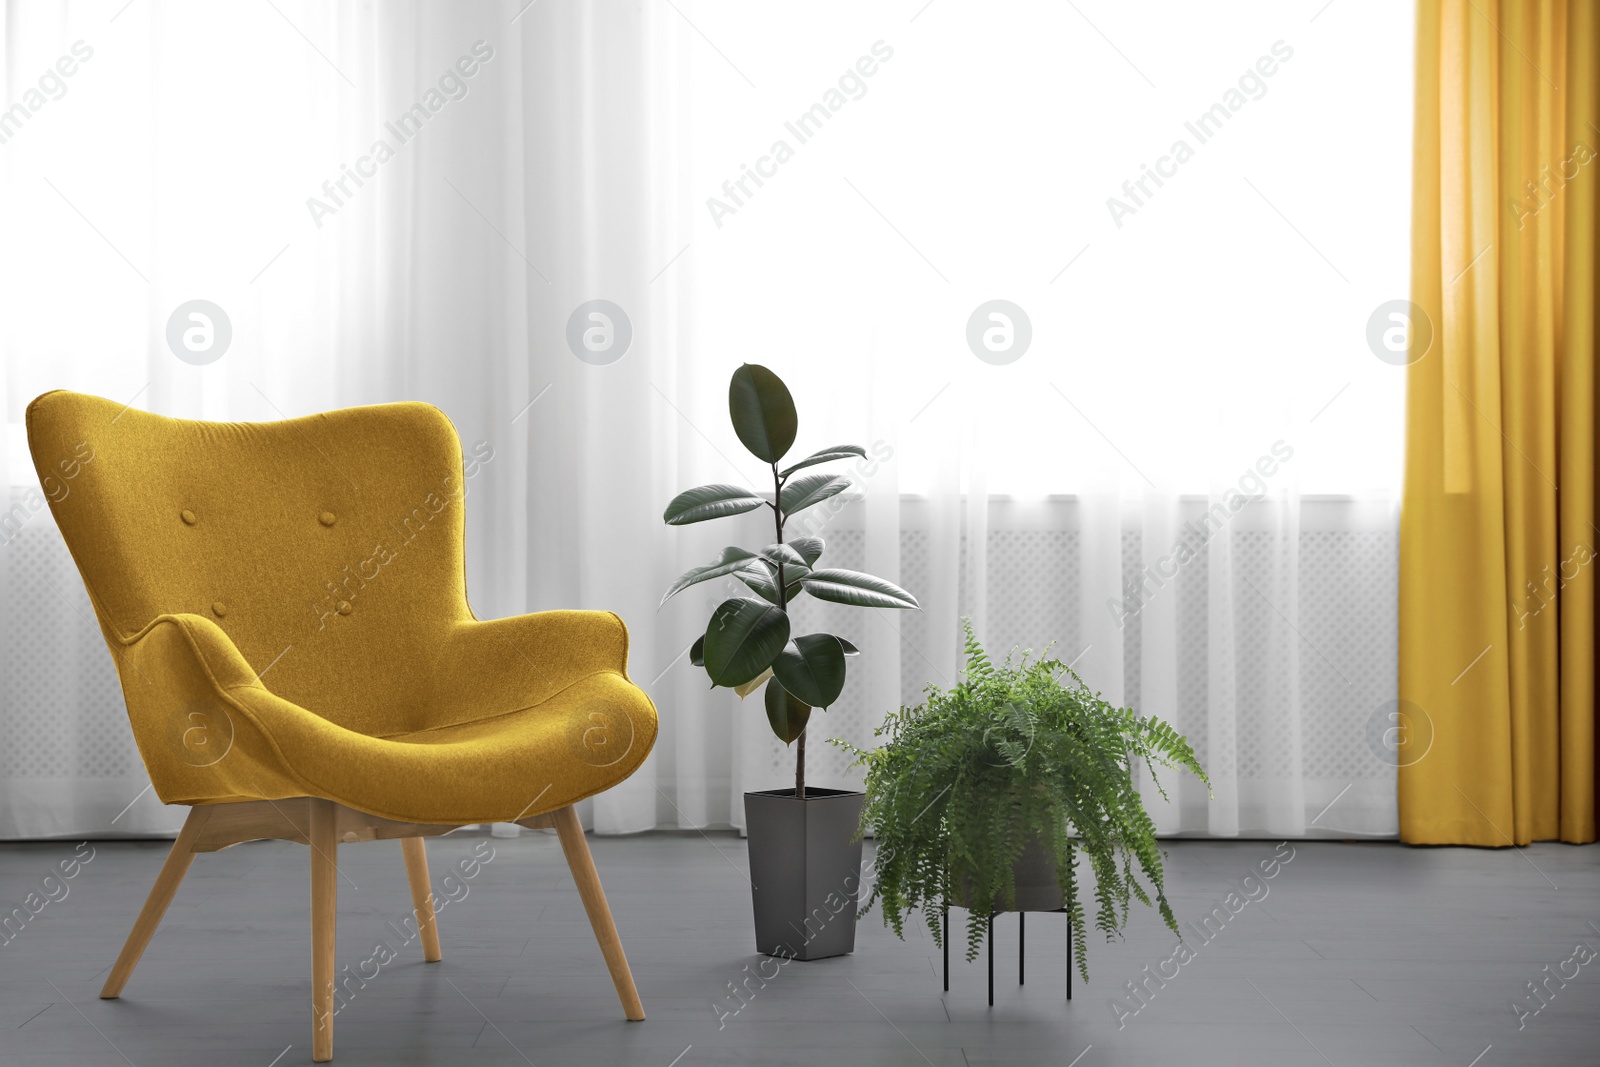 Image of Color of the year 2021. Stylish yellow armchair near window in room